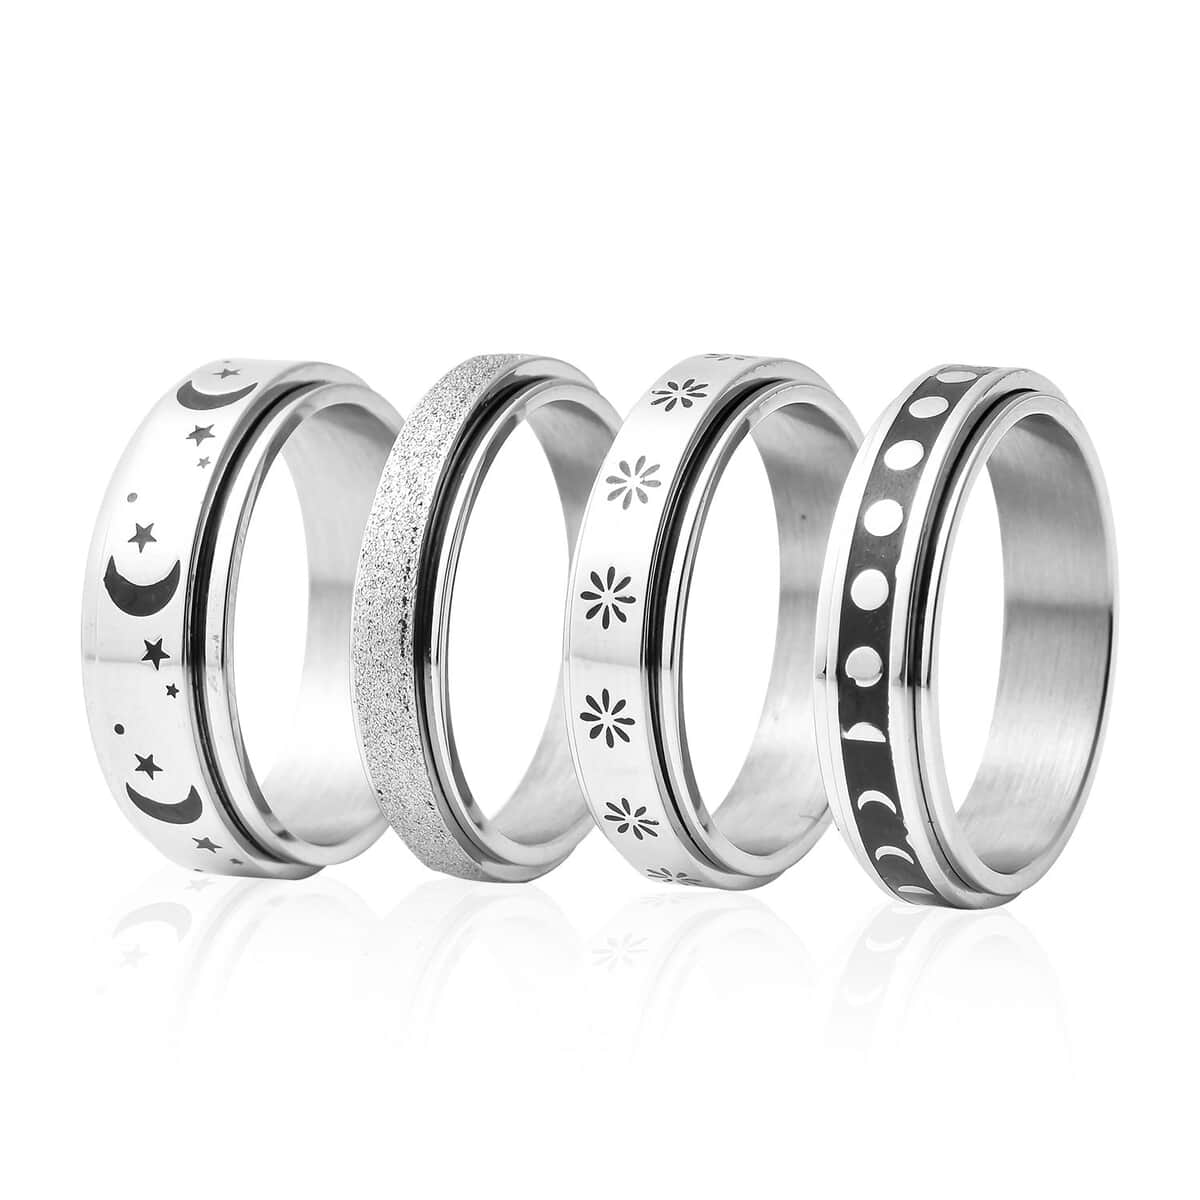 Set of 4 Stress Buster Spinner Ring in Stainless Steel (Size 12.0) image number 2